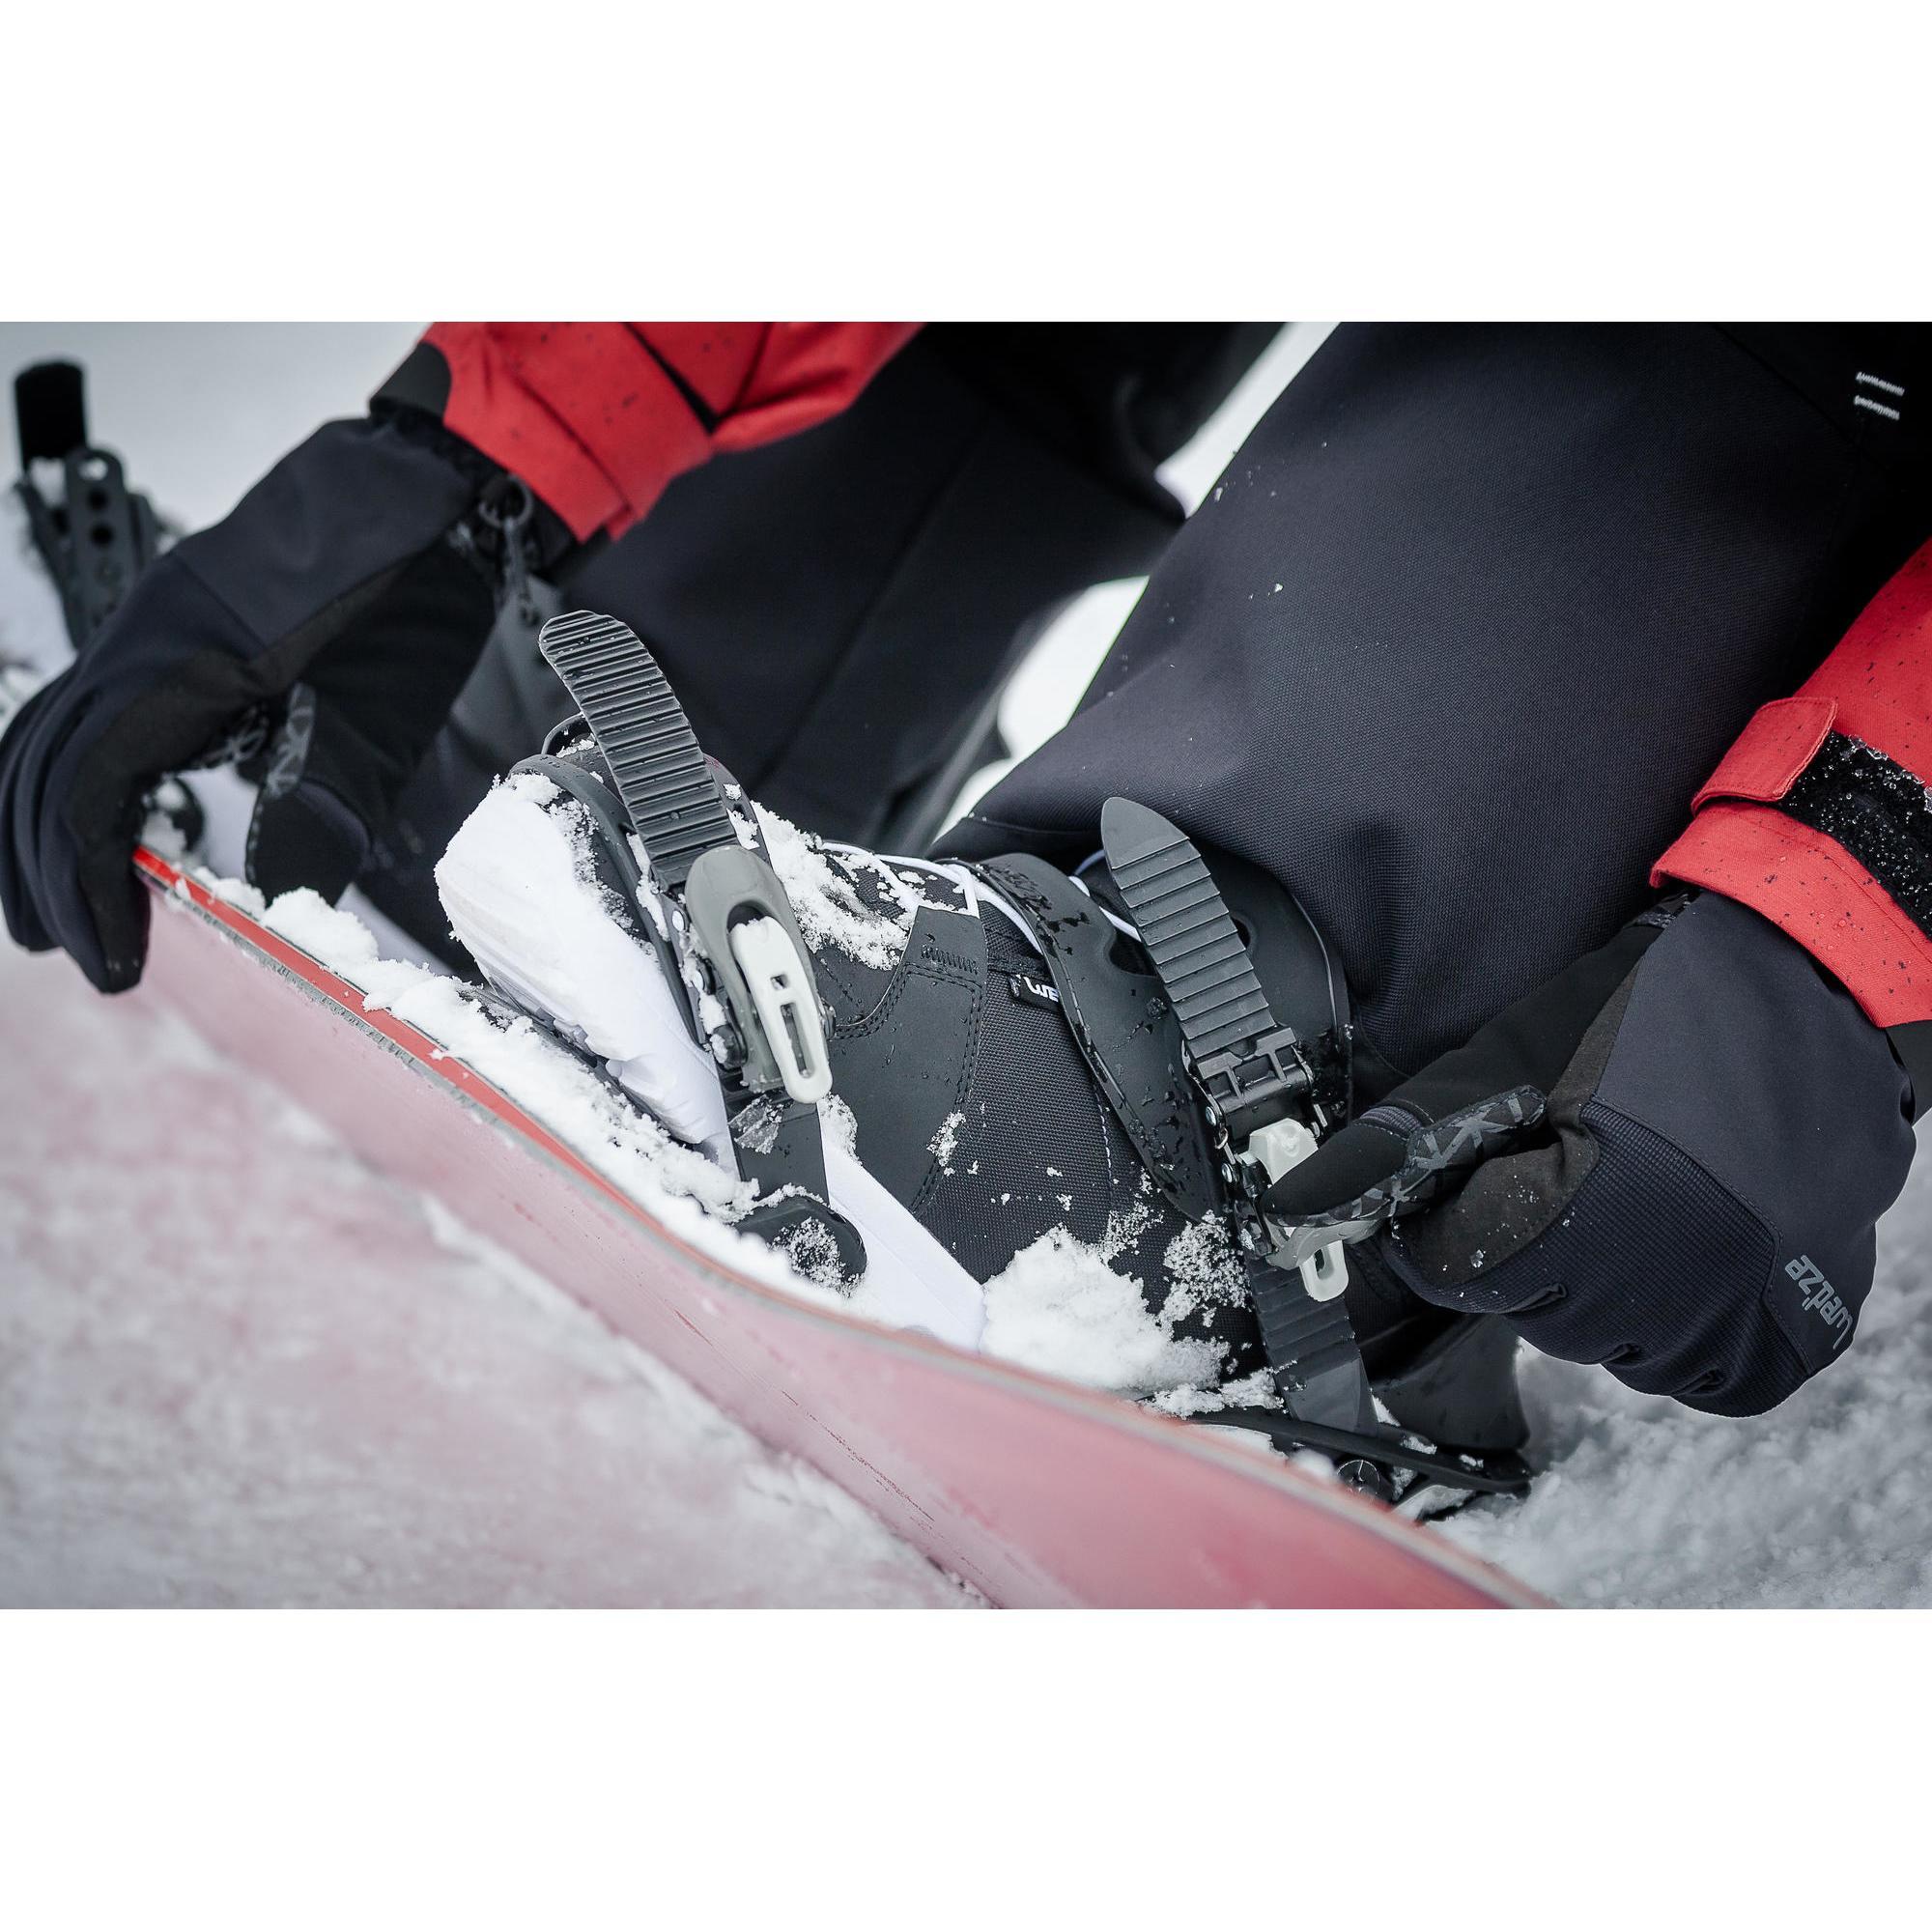 snowshoes for snowboard boots